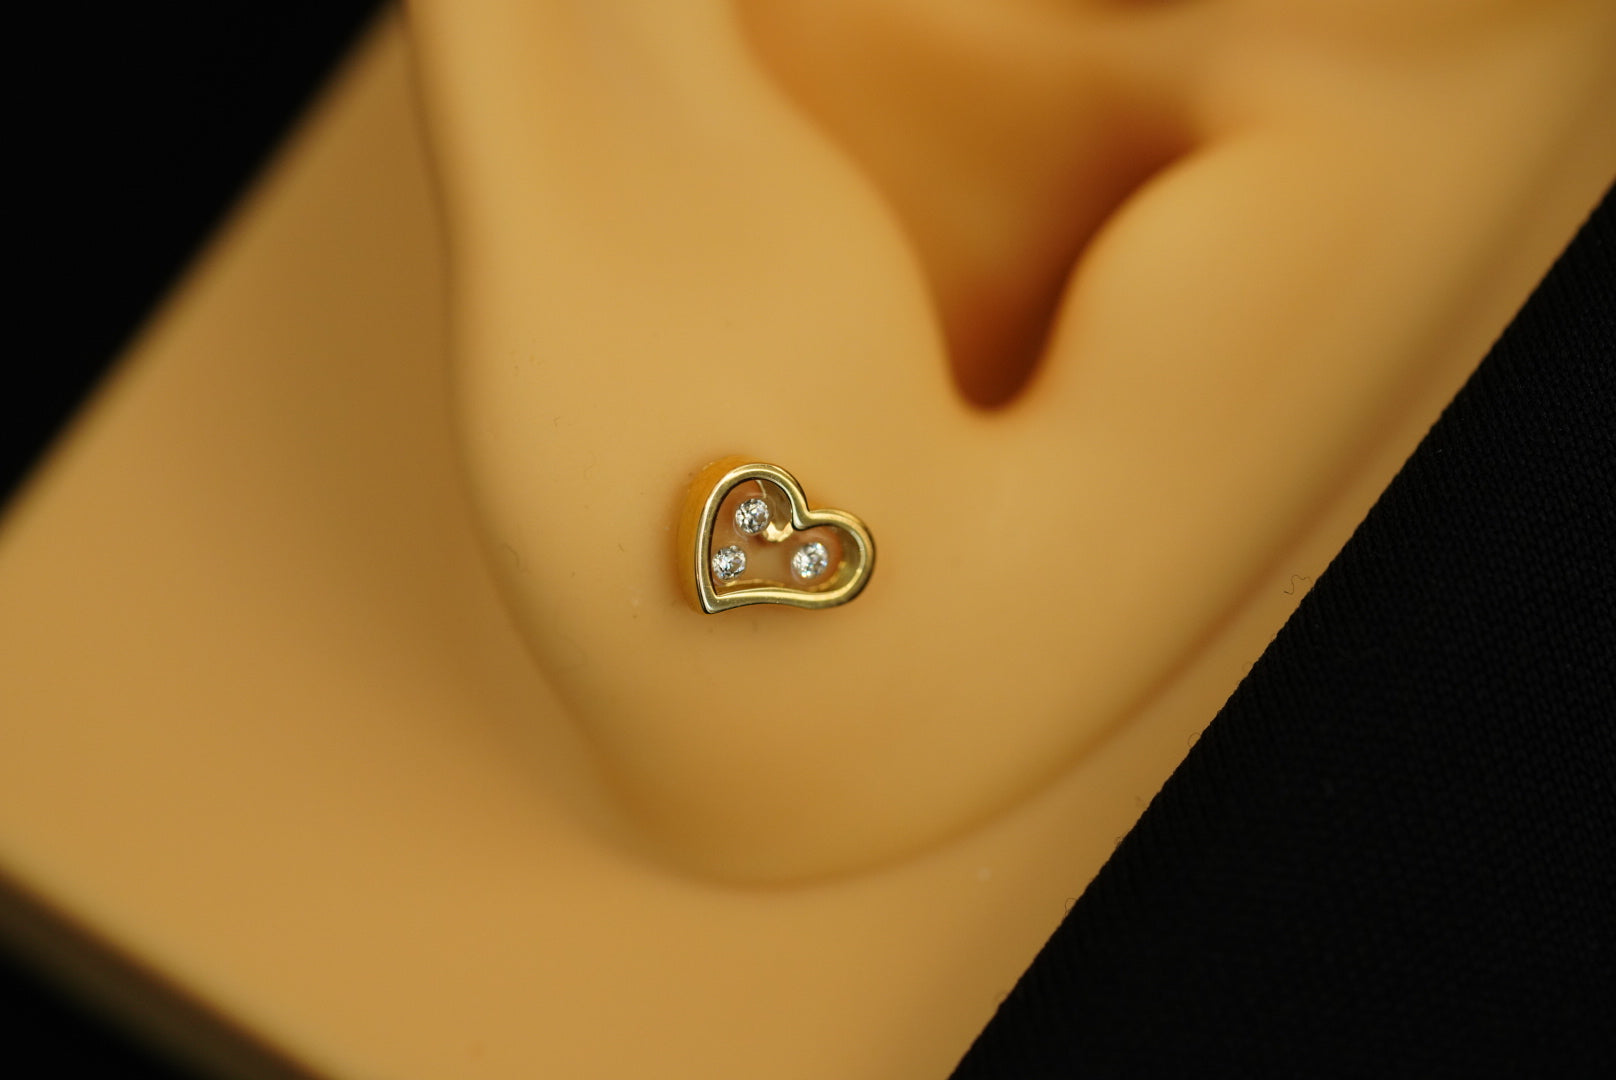 18k ADN Chain with Heart Pendant and Earrings